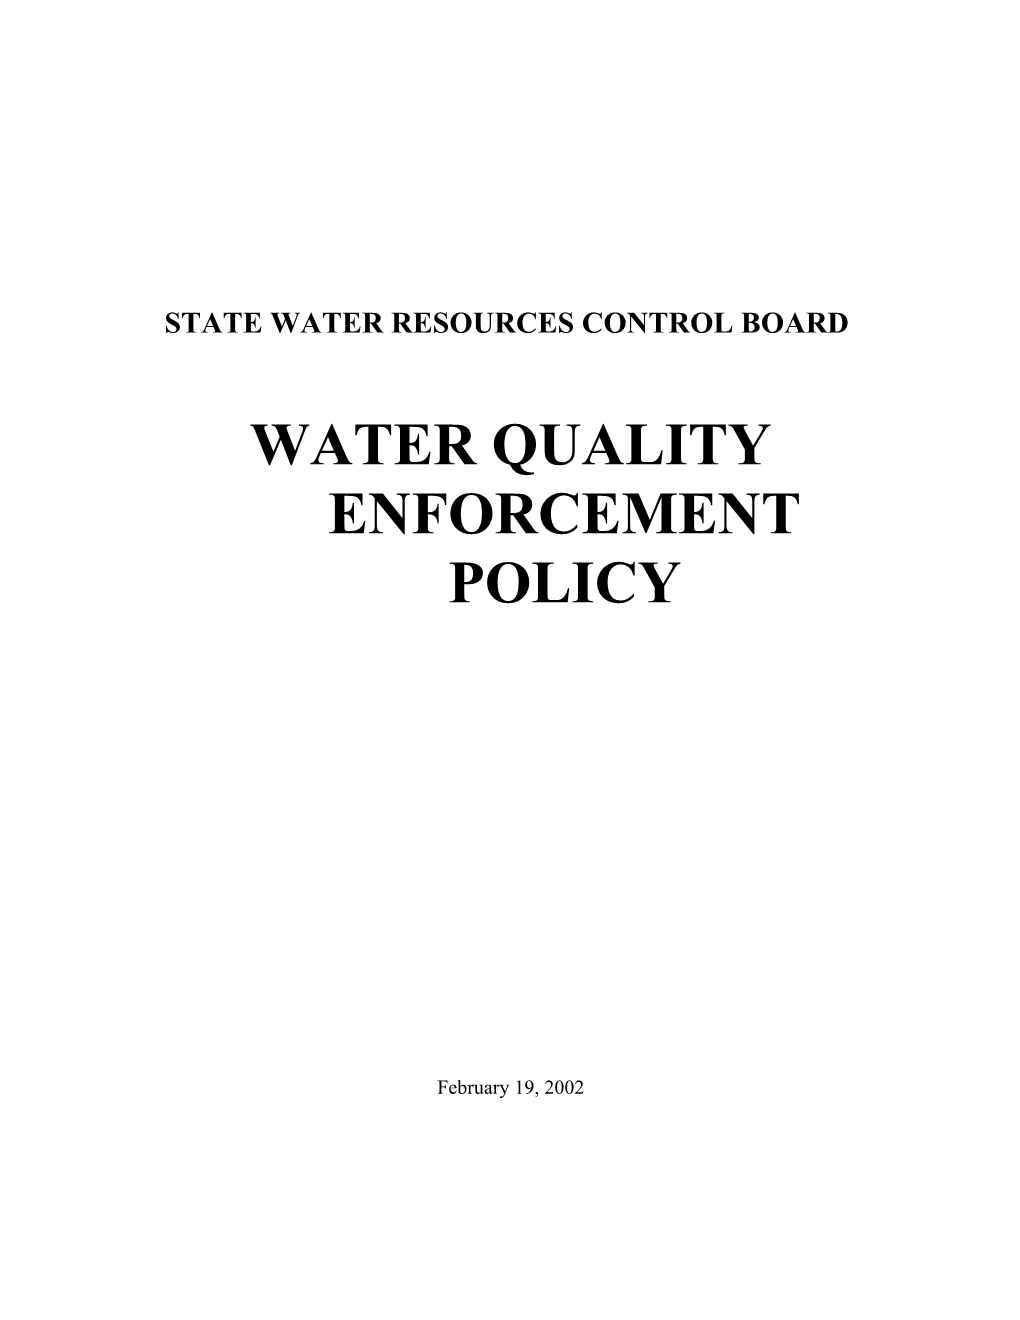 The State Water Resources Control Board s1